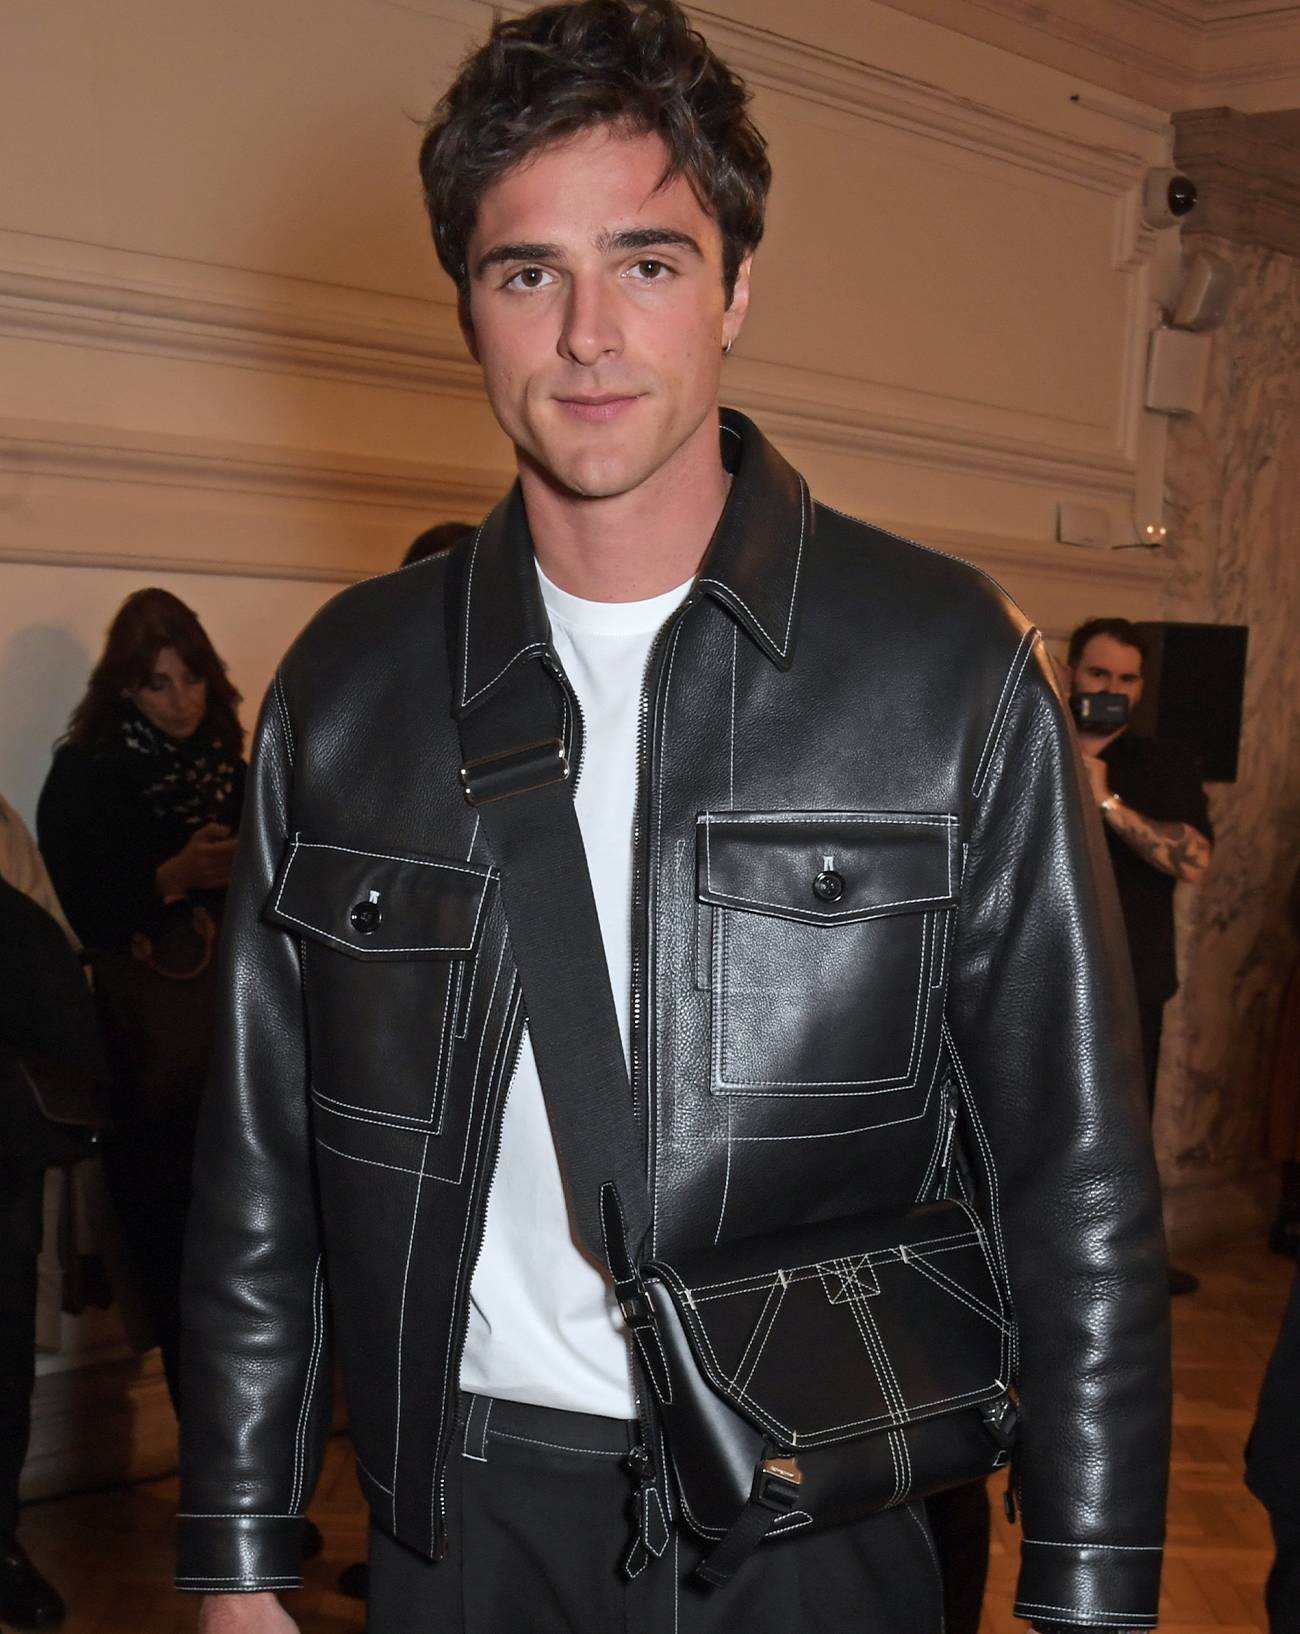 Jacob Elordi takes the lead with men’s handbags